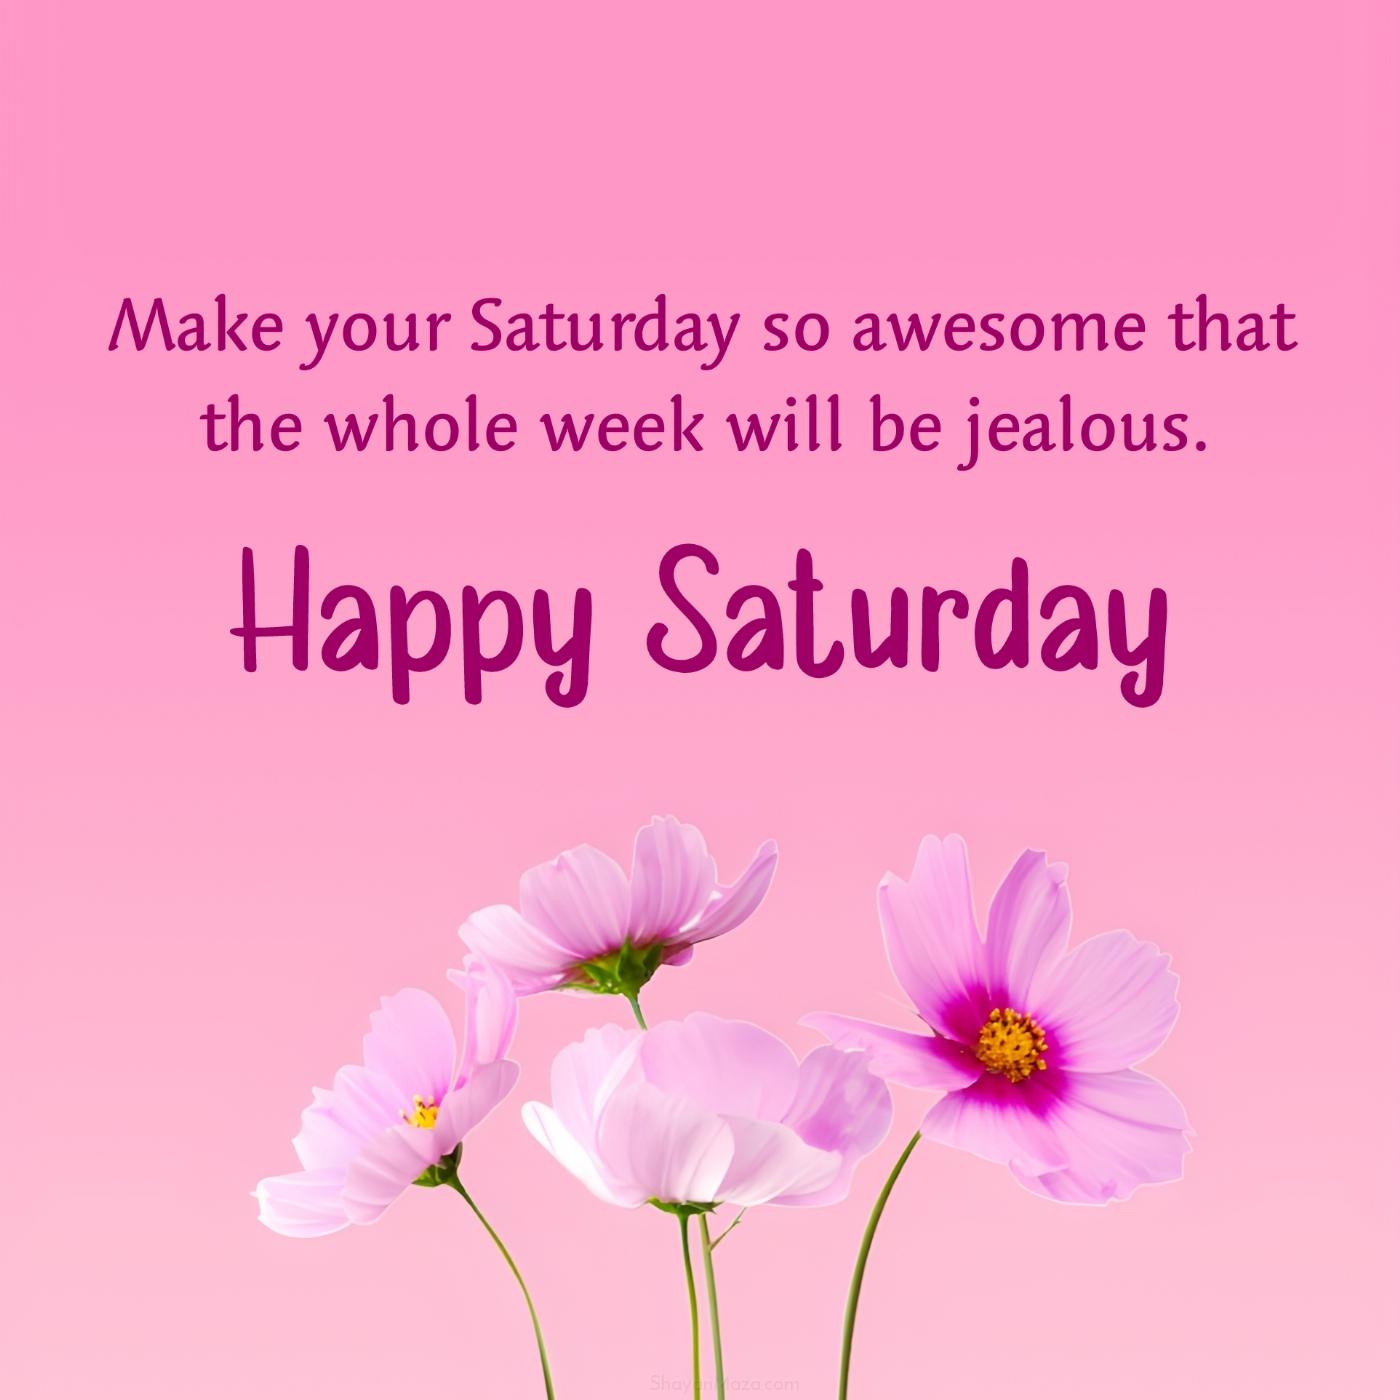 Make your Saturday so awesome that the whole week will be jealous